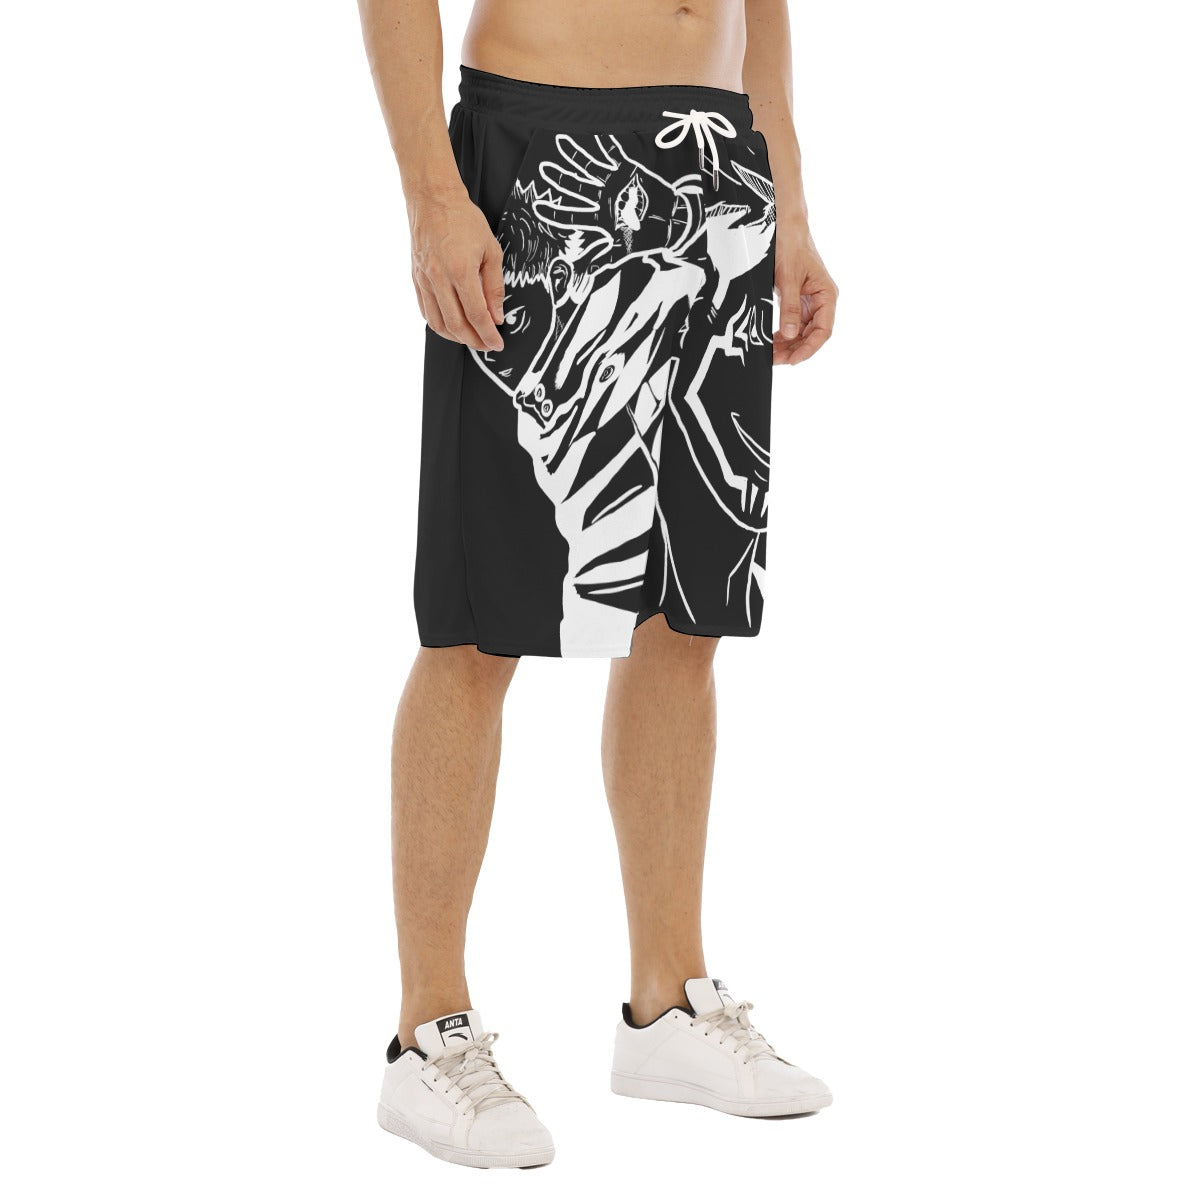 "CURSED KING VESSEL" Tether Loose Shorts